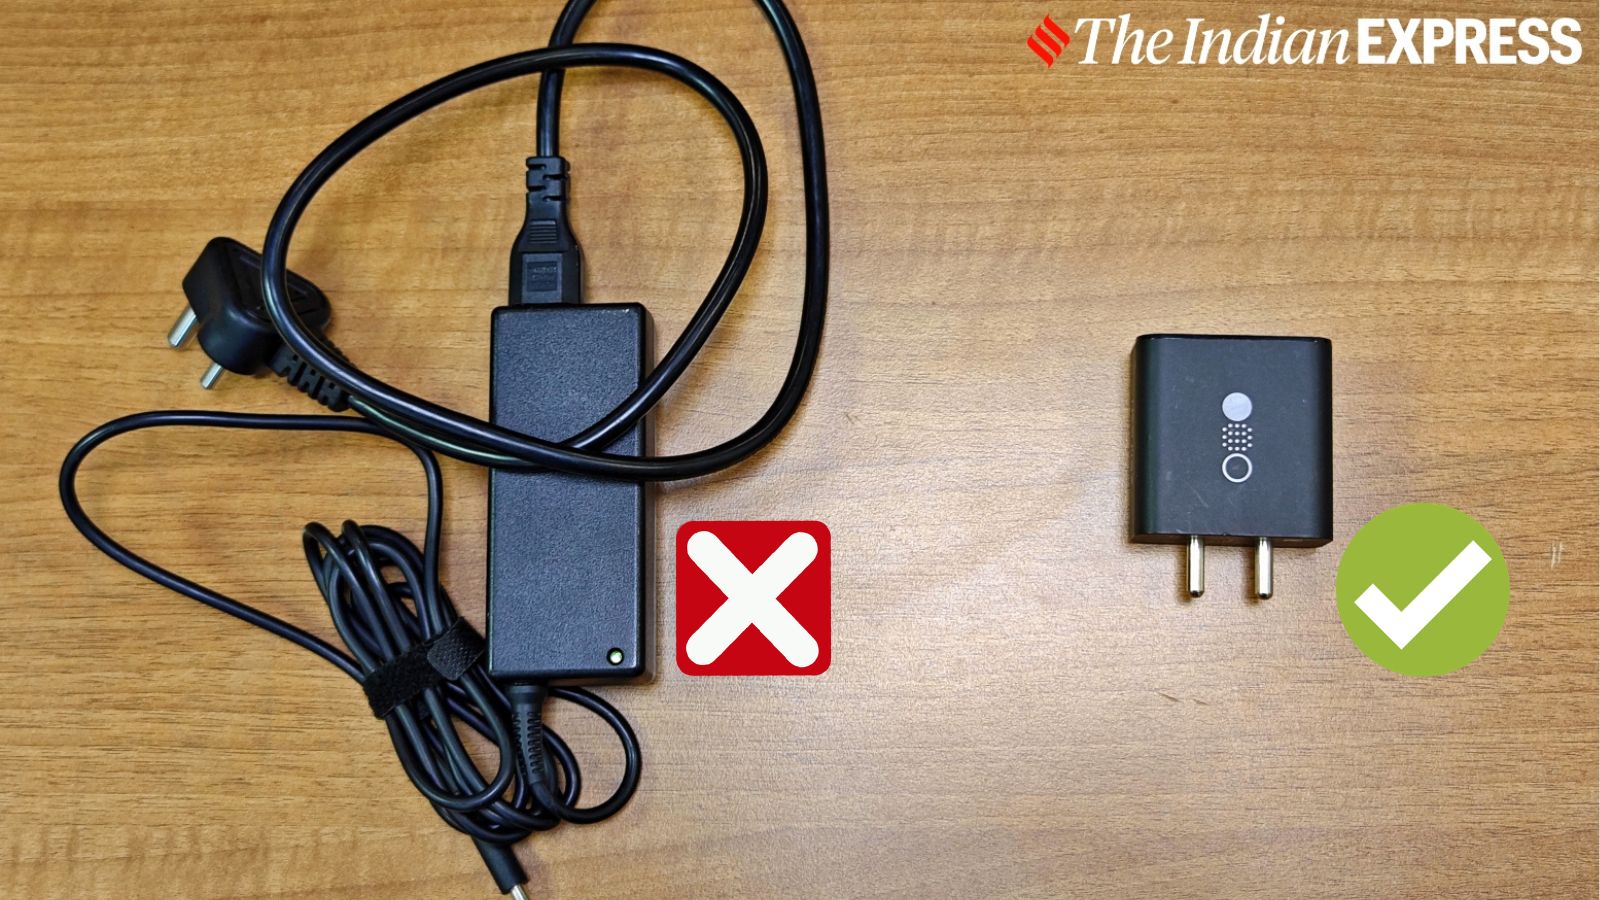 I fell hard for GaN charging and got rid of my laptop adapter: Here's why